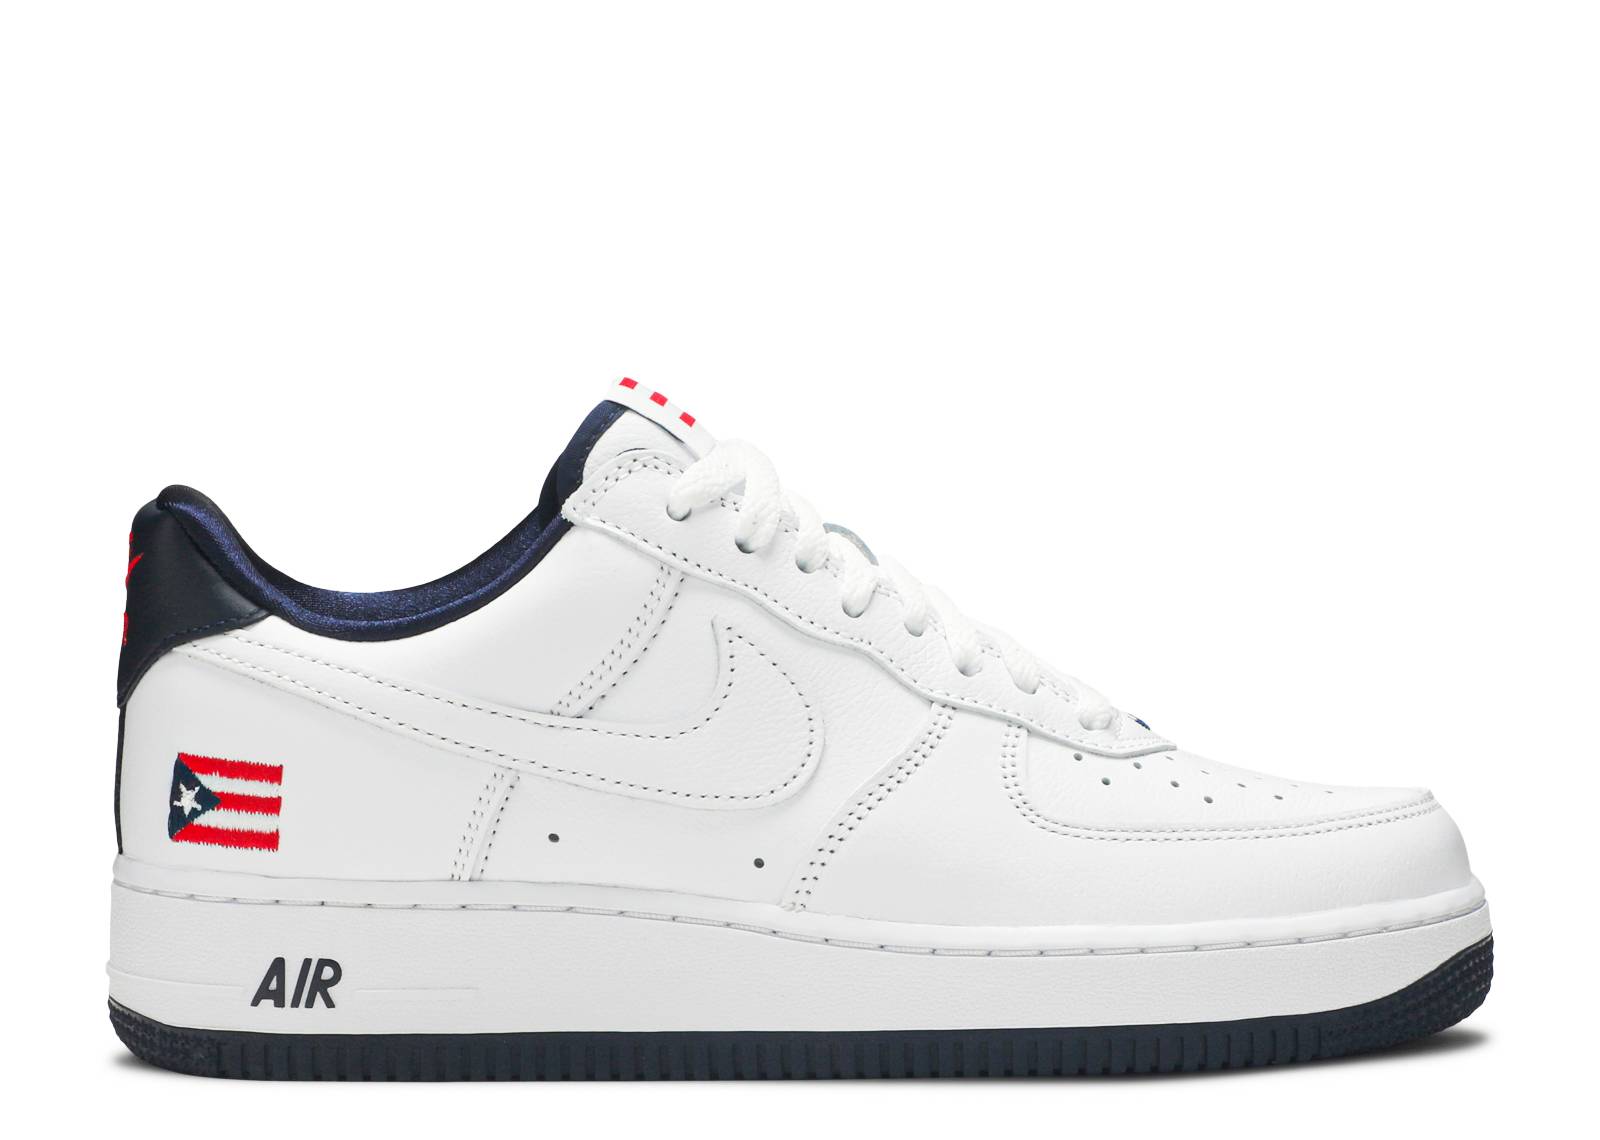 Air Force 1 Low QS 'Puerto Rico'